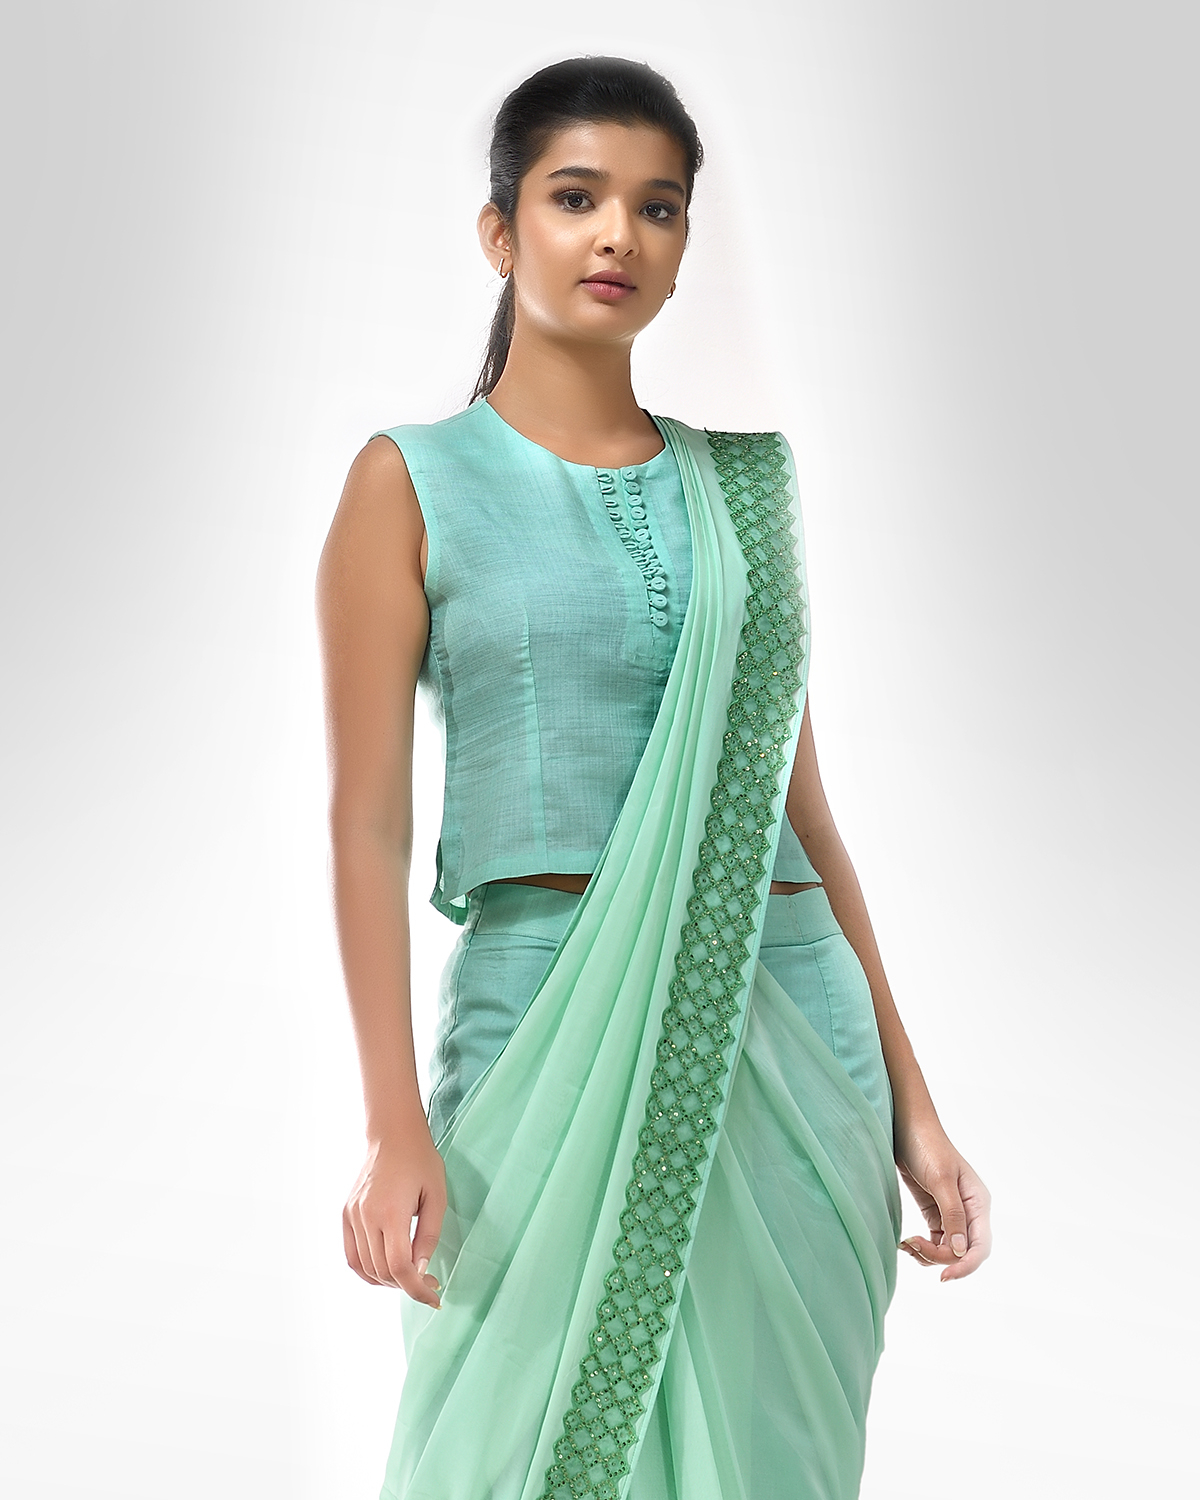 Aqua pre stitched sari with an embroidered border detail